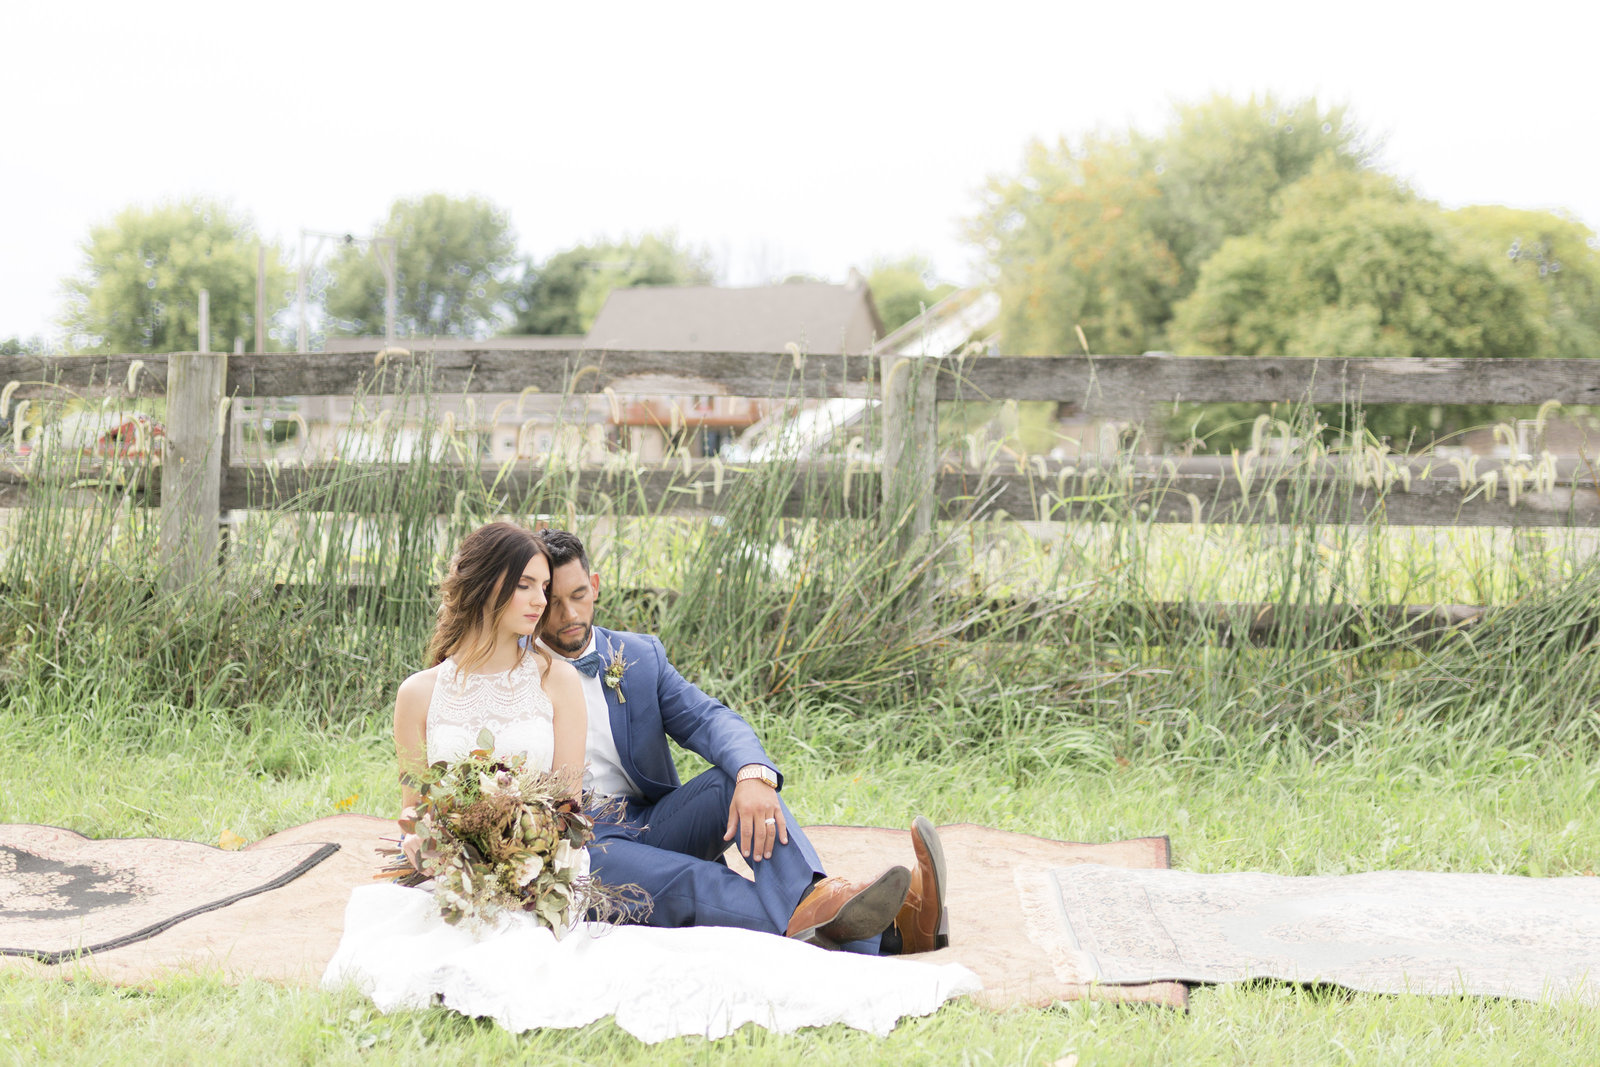 Bride and groom snuggle on a blanket in front of a fence; Bear Cave Lake